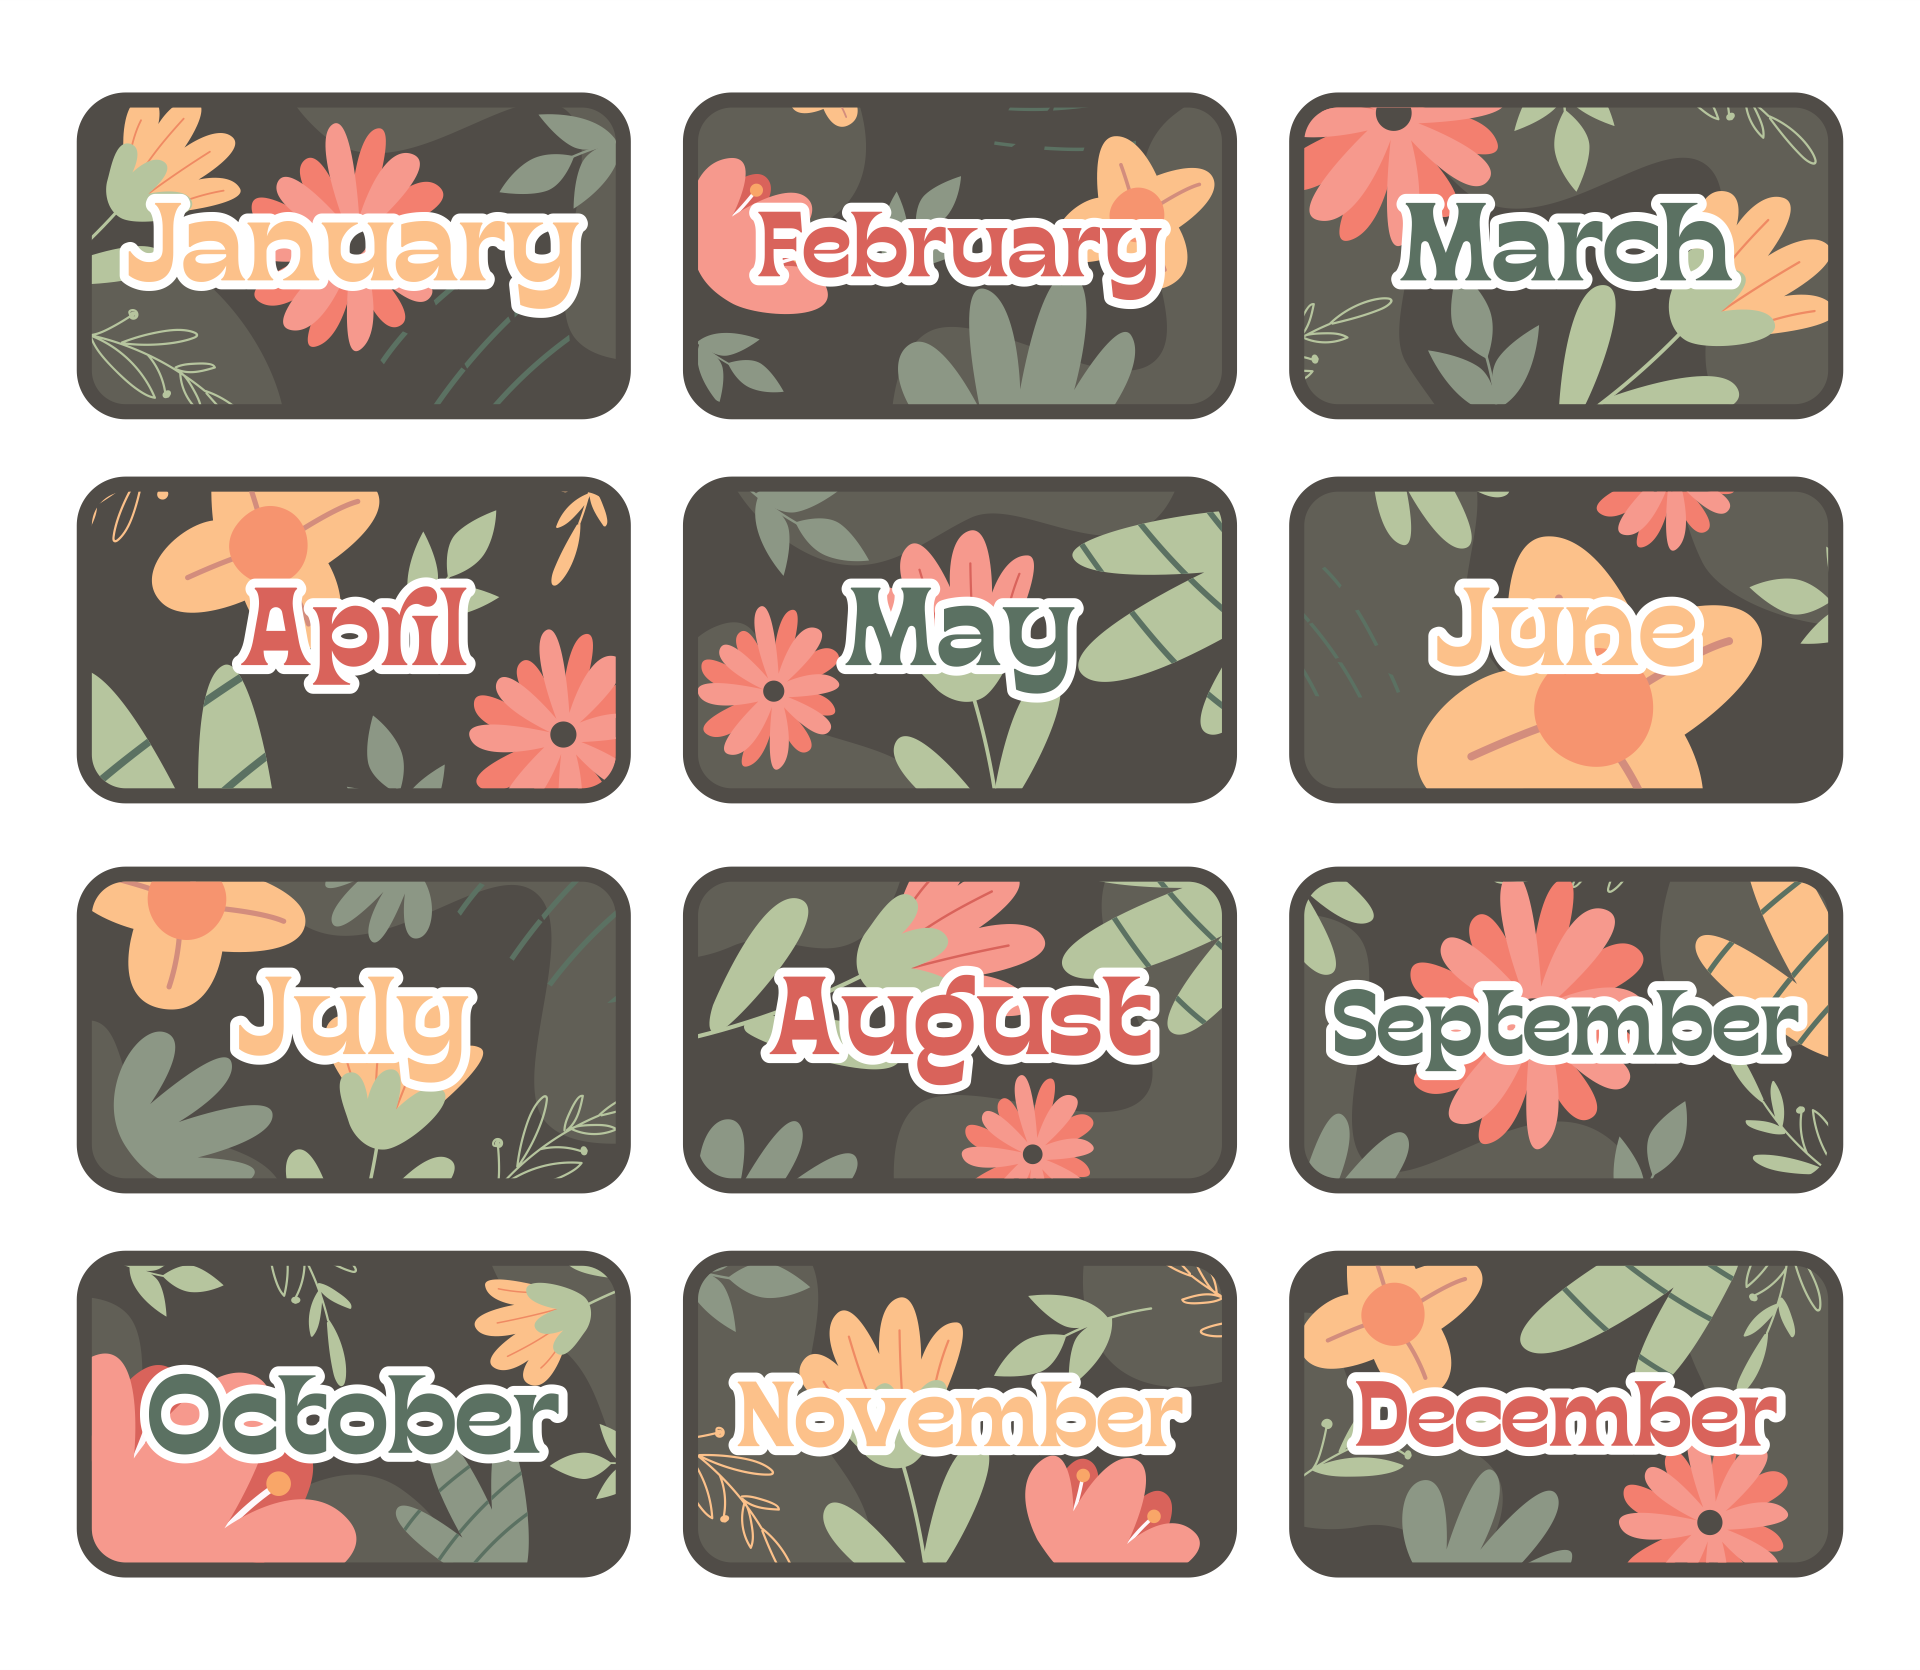 Months Seasons of the Year Printables